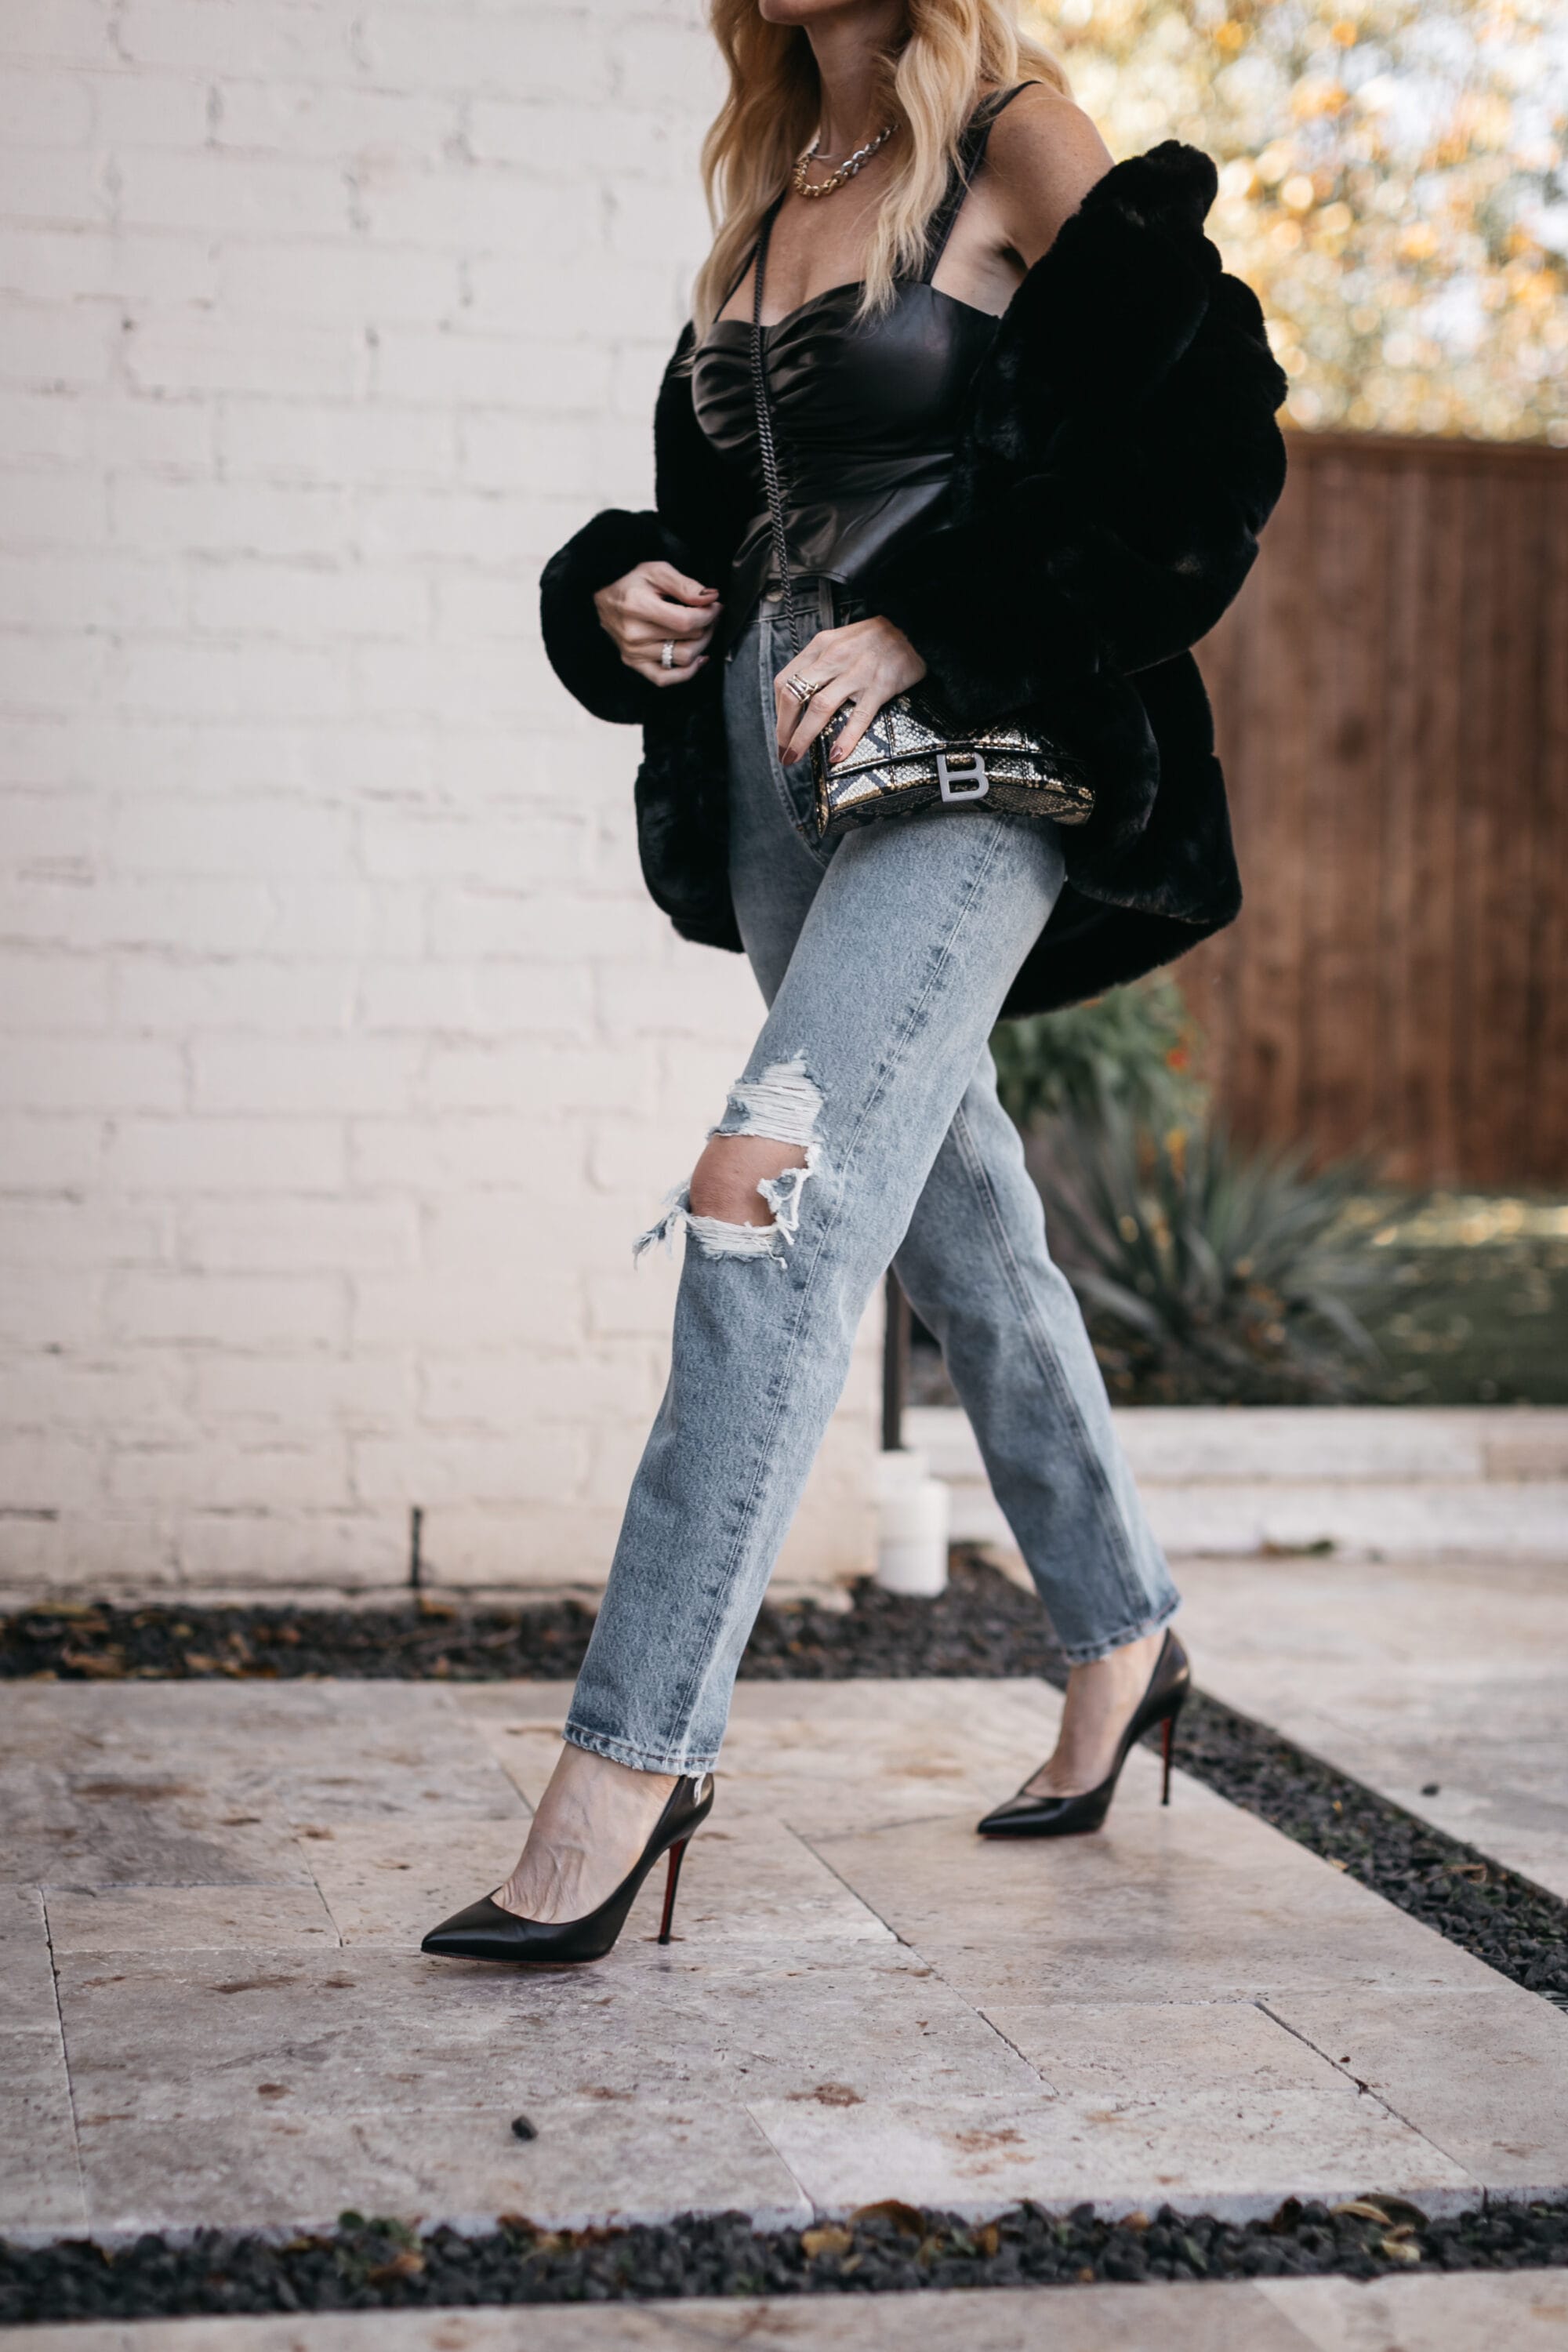 How To Wear A Denim Jacket: 7 Outfit Ideas To Try This Season - Lulus.com  Fashion Blog